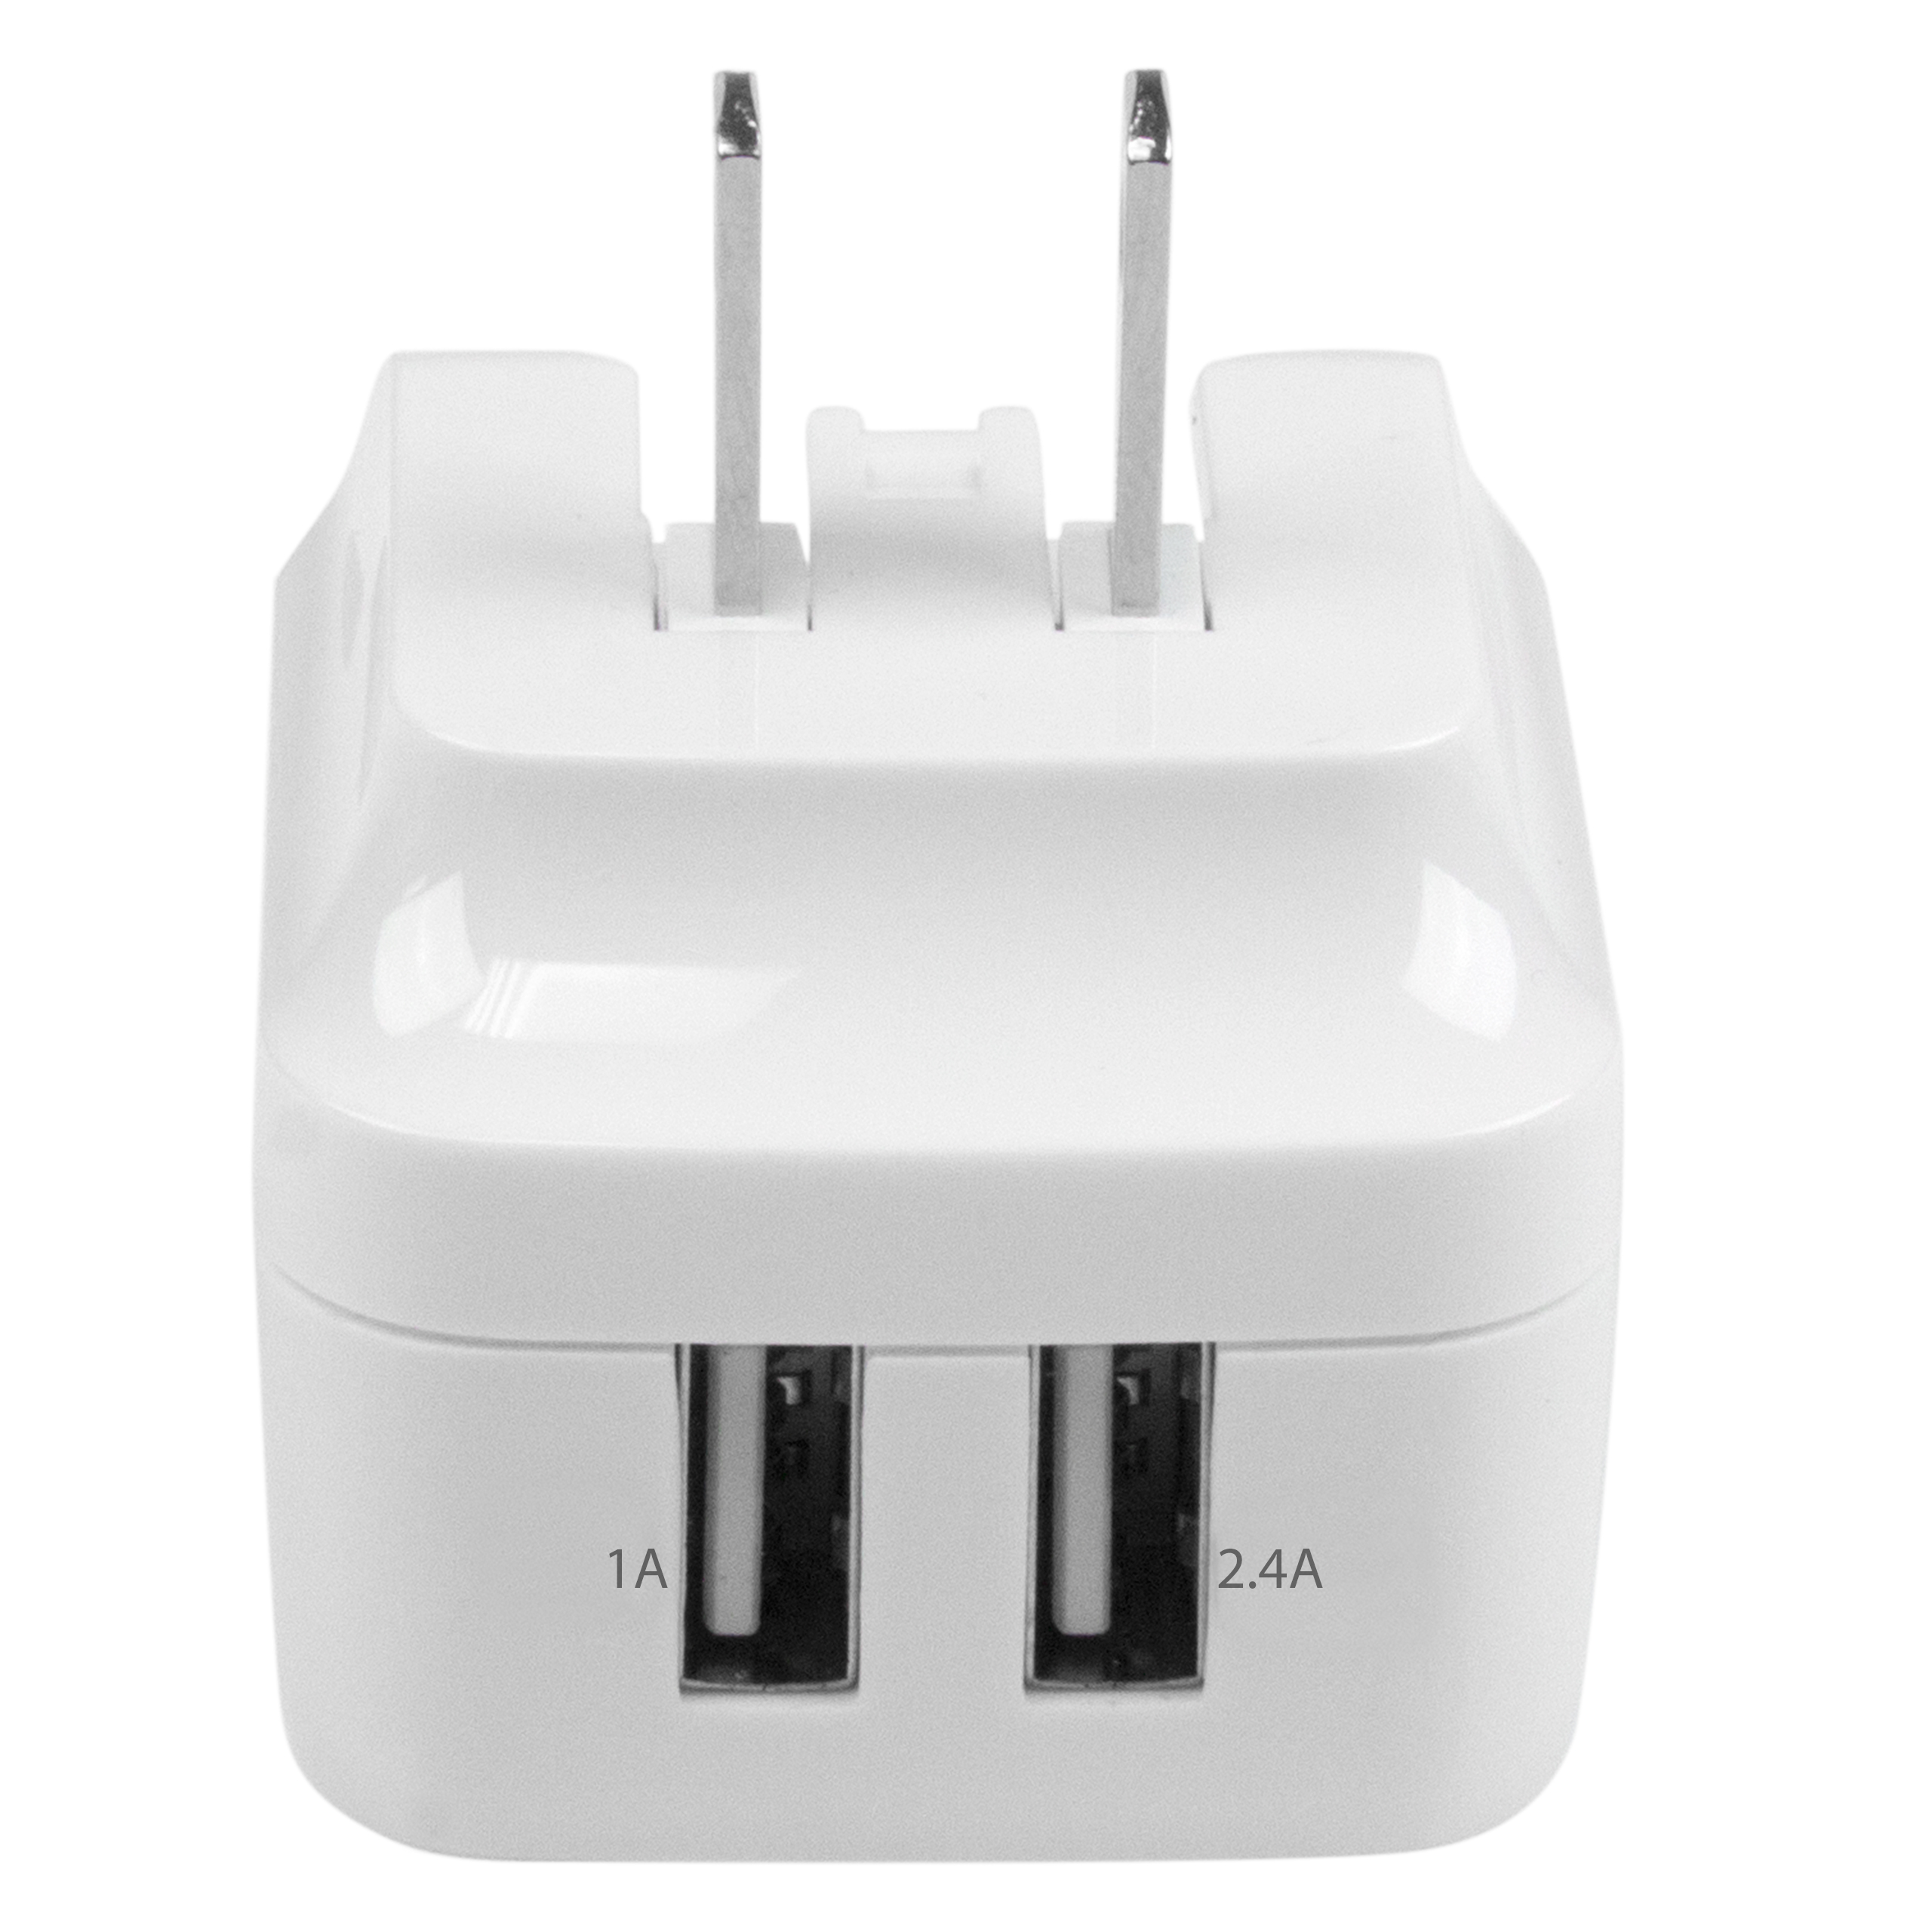 4-Port USB Charging Station - 48W/9.6A - USB Adapters (USB 2.0), Cables